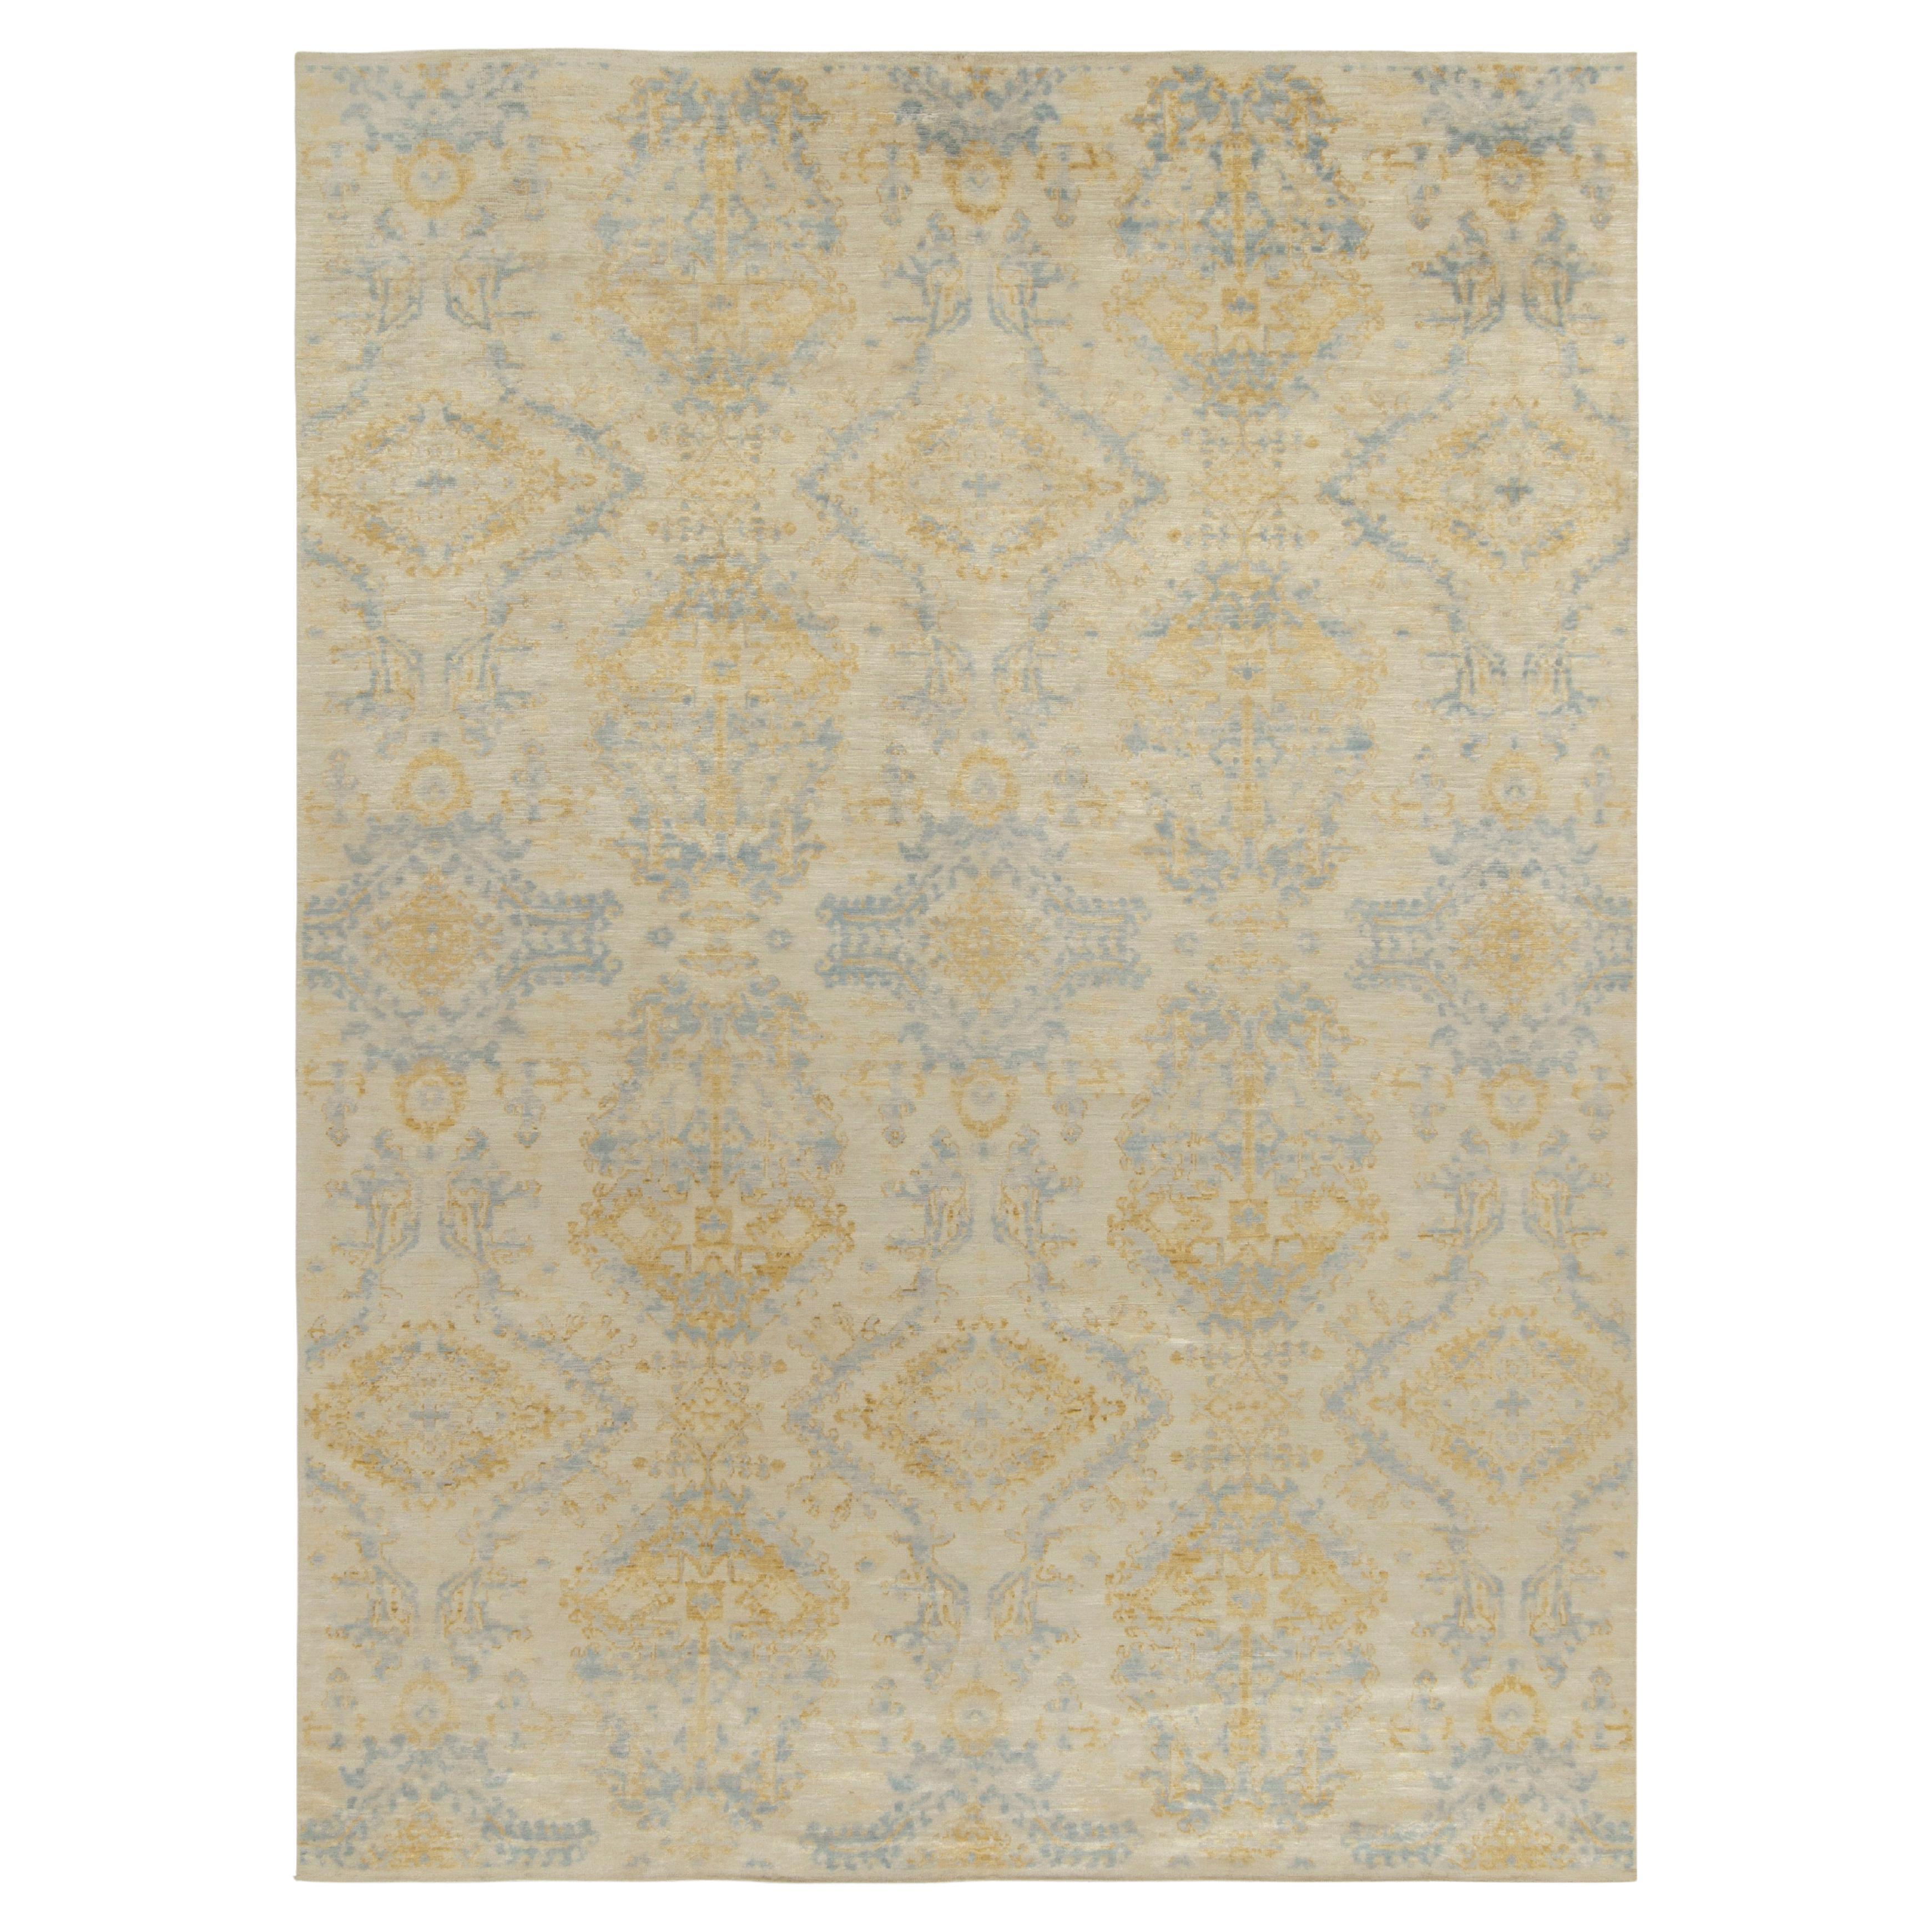 Rug & Kilim’s Contemporary Rug in Blue, Gold & Beige All over Pattern For Sale